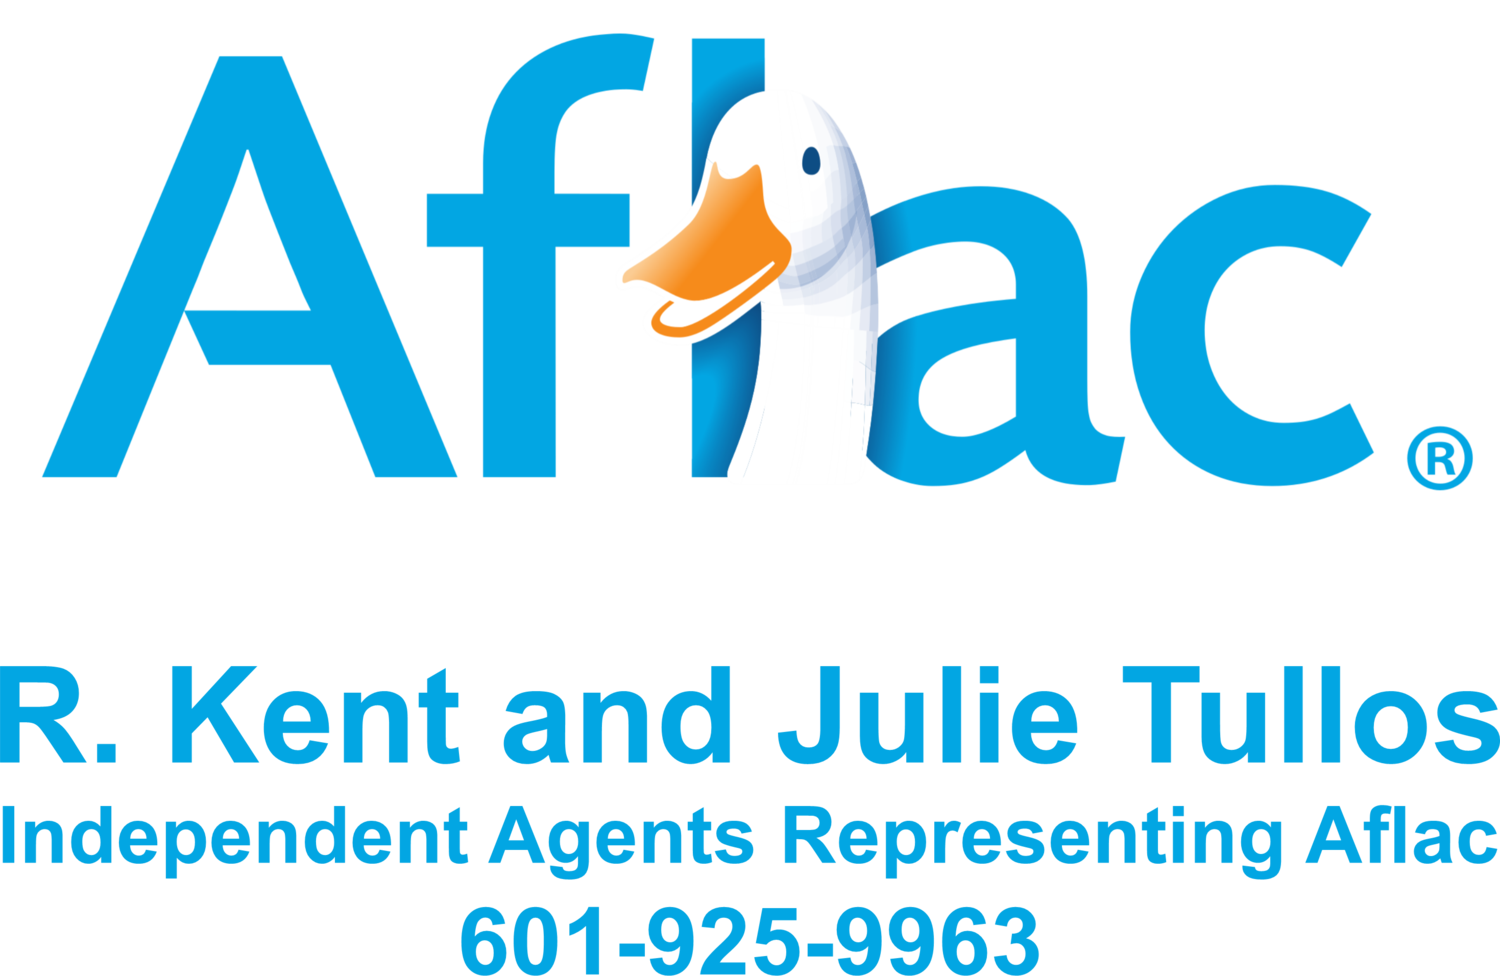 Aflac Agents R. Kent and Julie Tullos